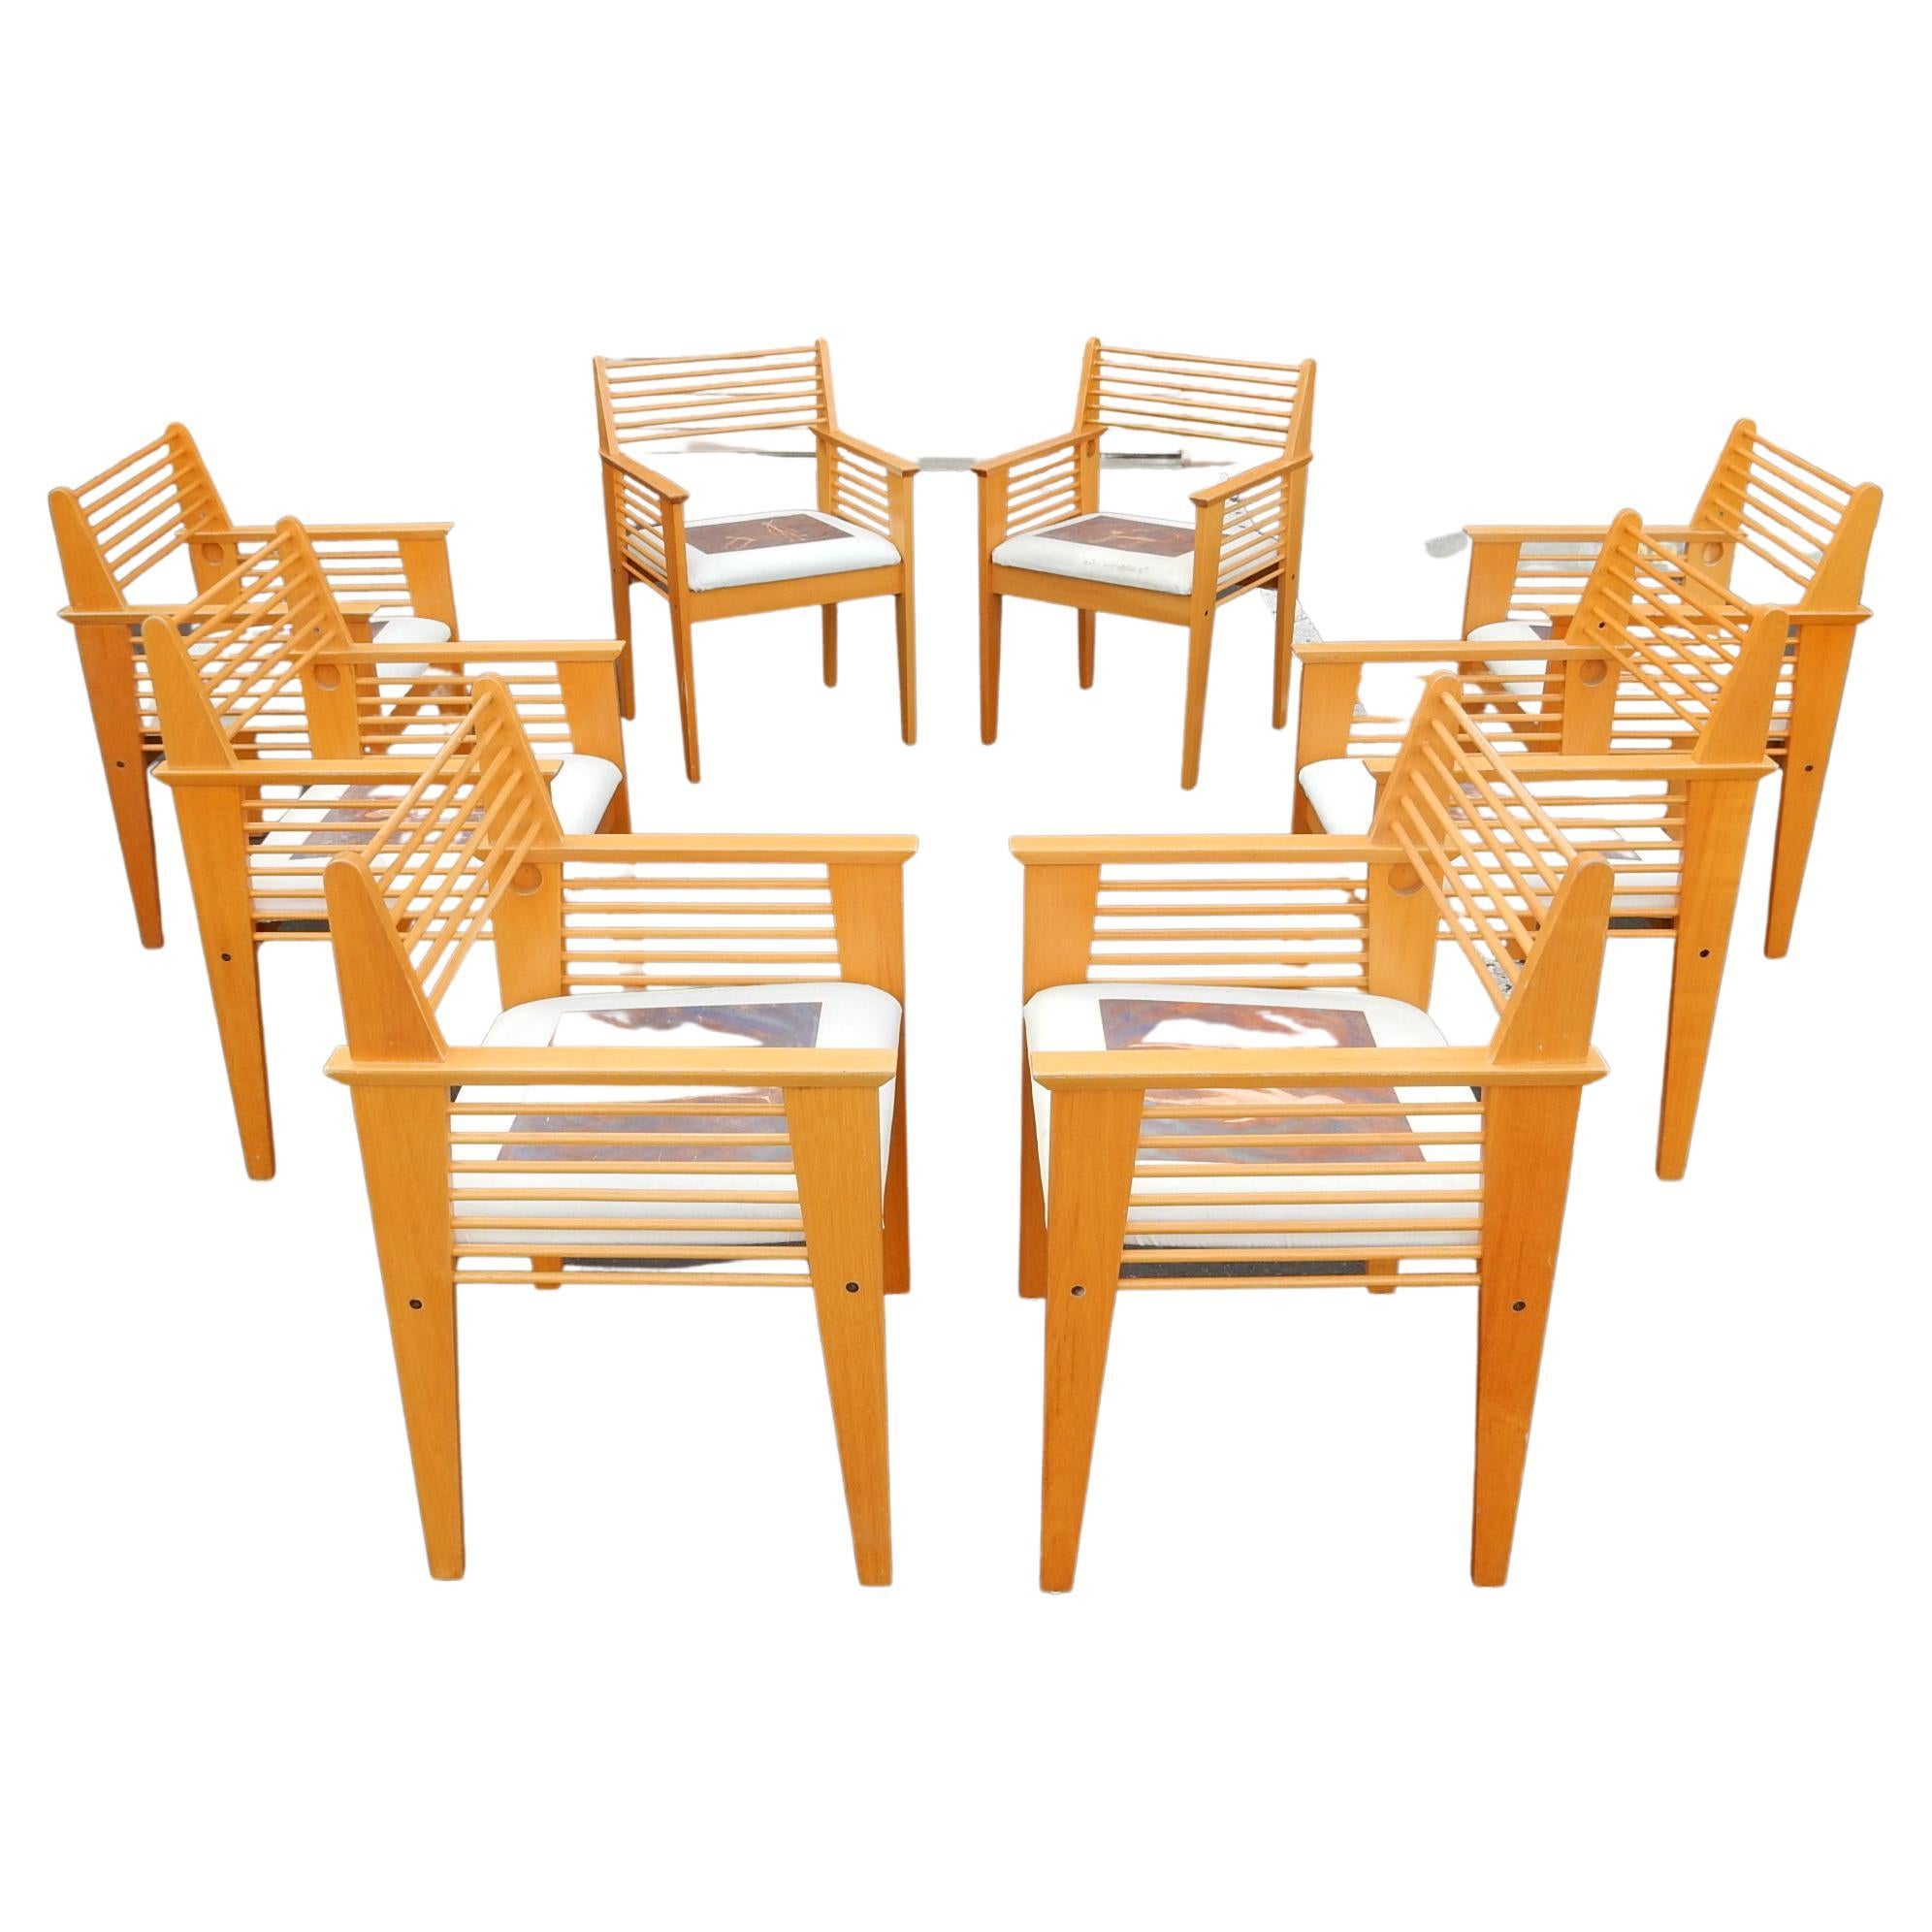 Set of 8 Post-Modern era spindle chairs in the Jean Prouve style.
Aesthetically pleasing. Light weight wood with golden Shellac finish.
Each seat cover is an original Giocometti style figural painting by Pennsylvania artist Jayson Clymer,
each